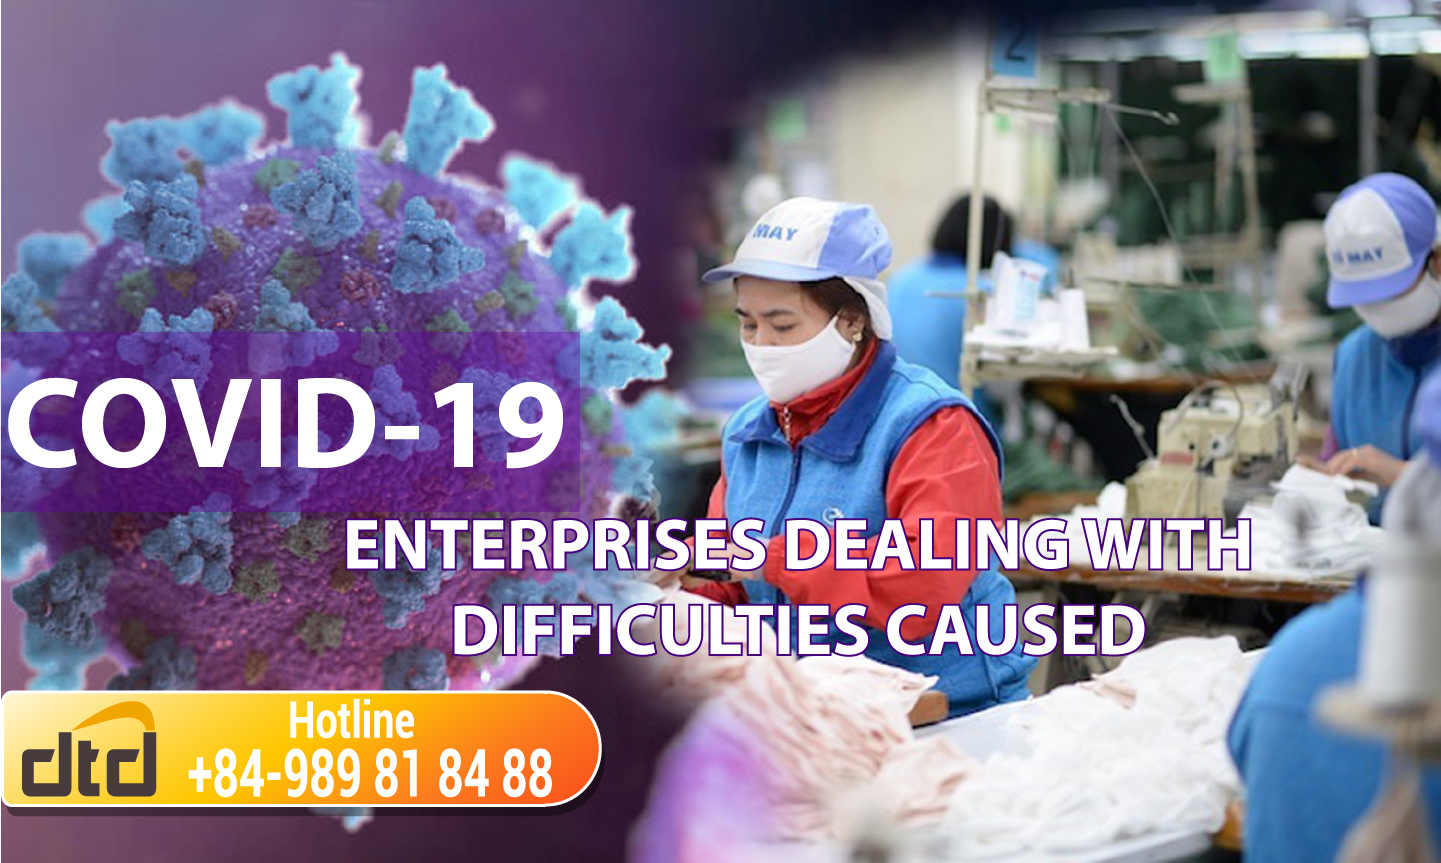 ENTERPRISES DEALING WITH DIFFICULTIES CAUSED BY COVID-19 IN ACCORDANCE WITH VIETNAMESE LAW IN FORCE